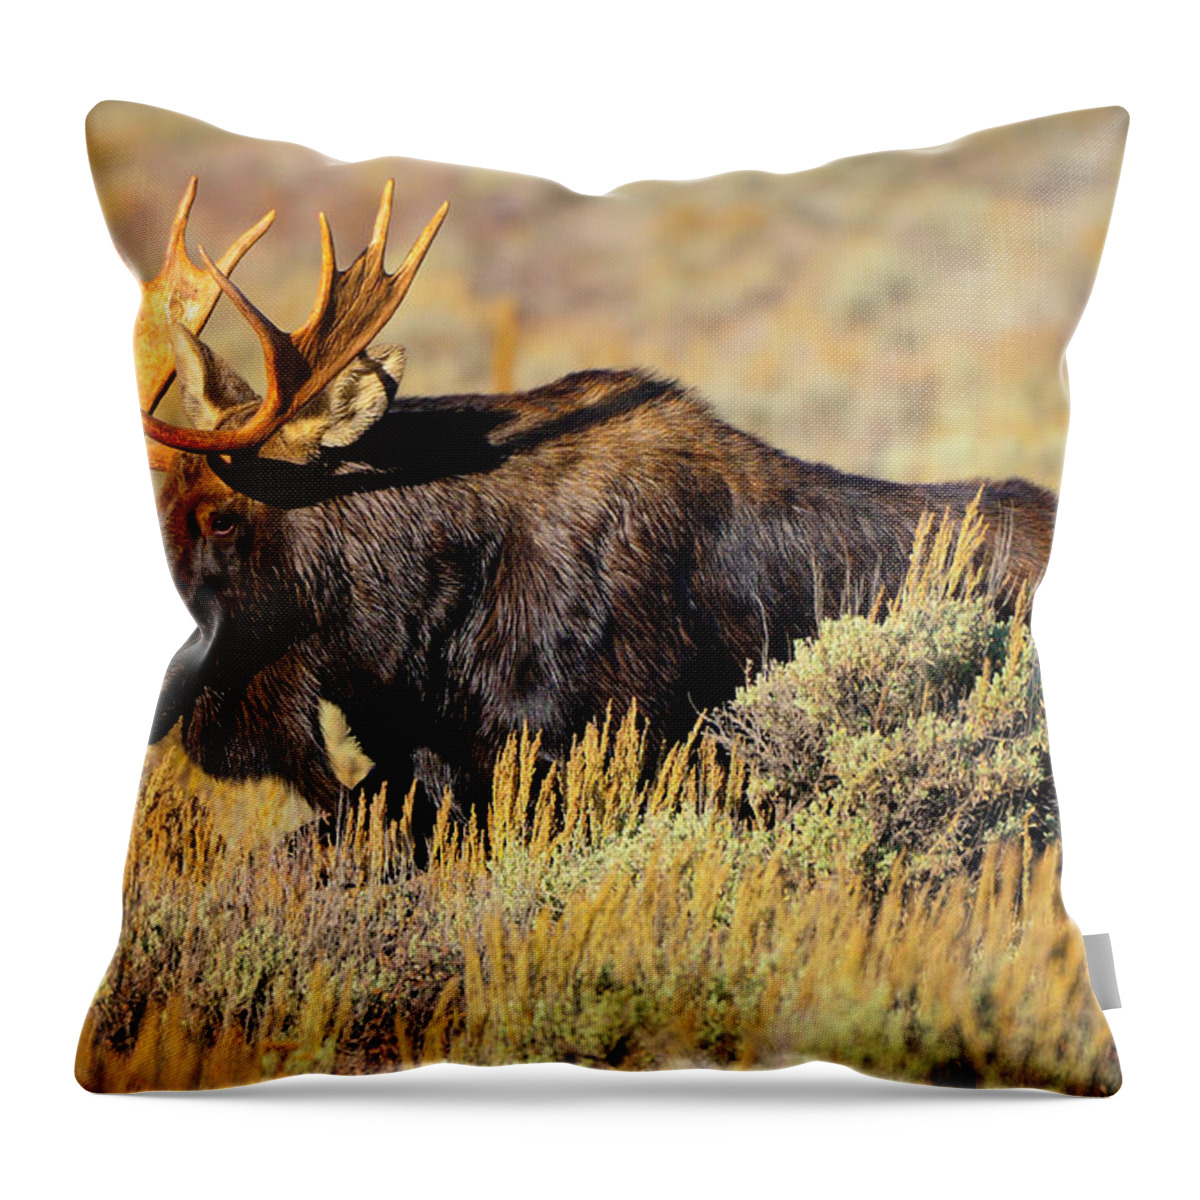 Moose Throw Pillow featuring the photograph Big Boy by Greg Norrell